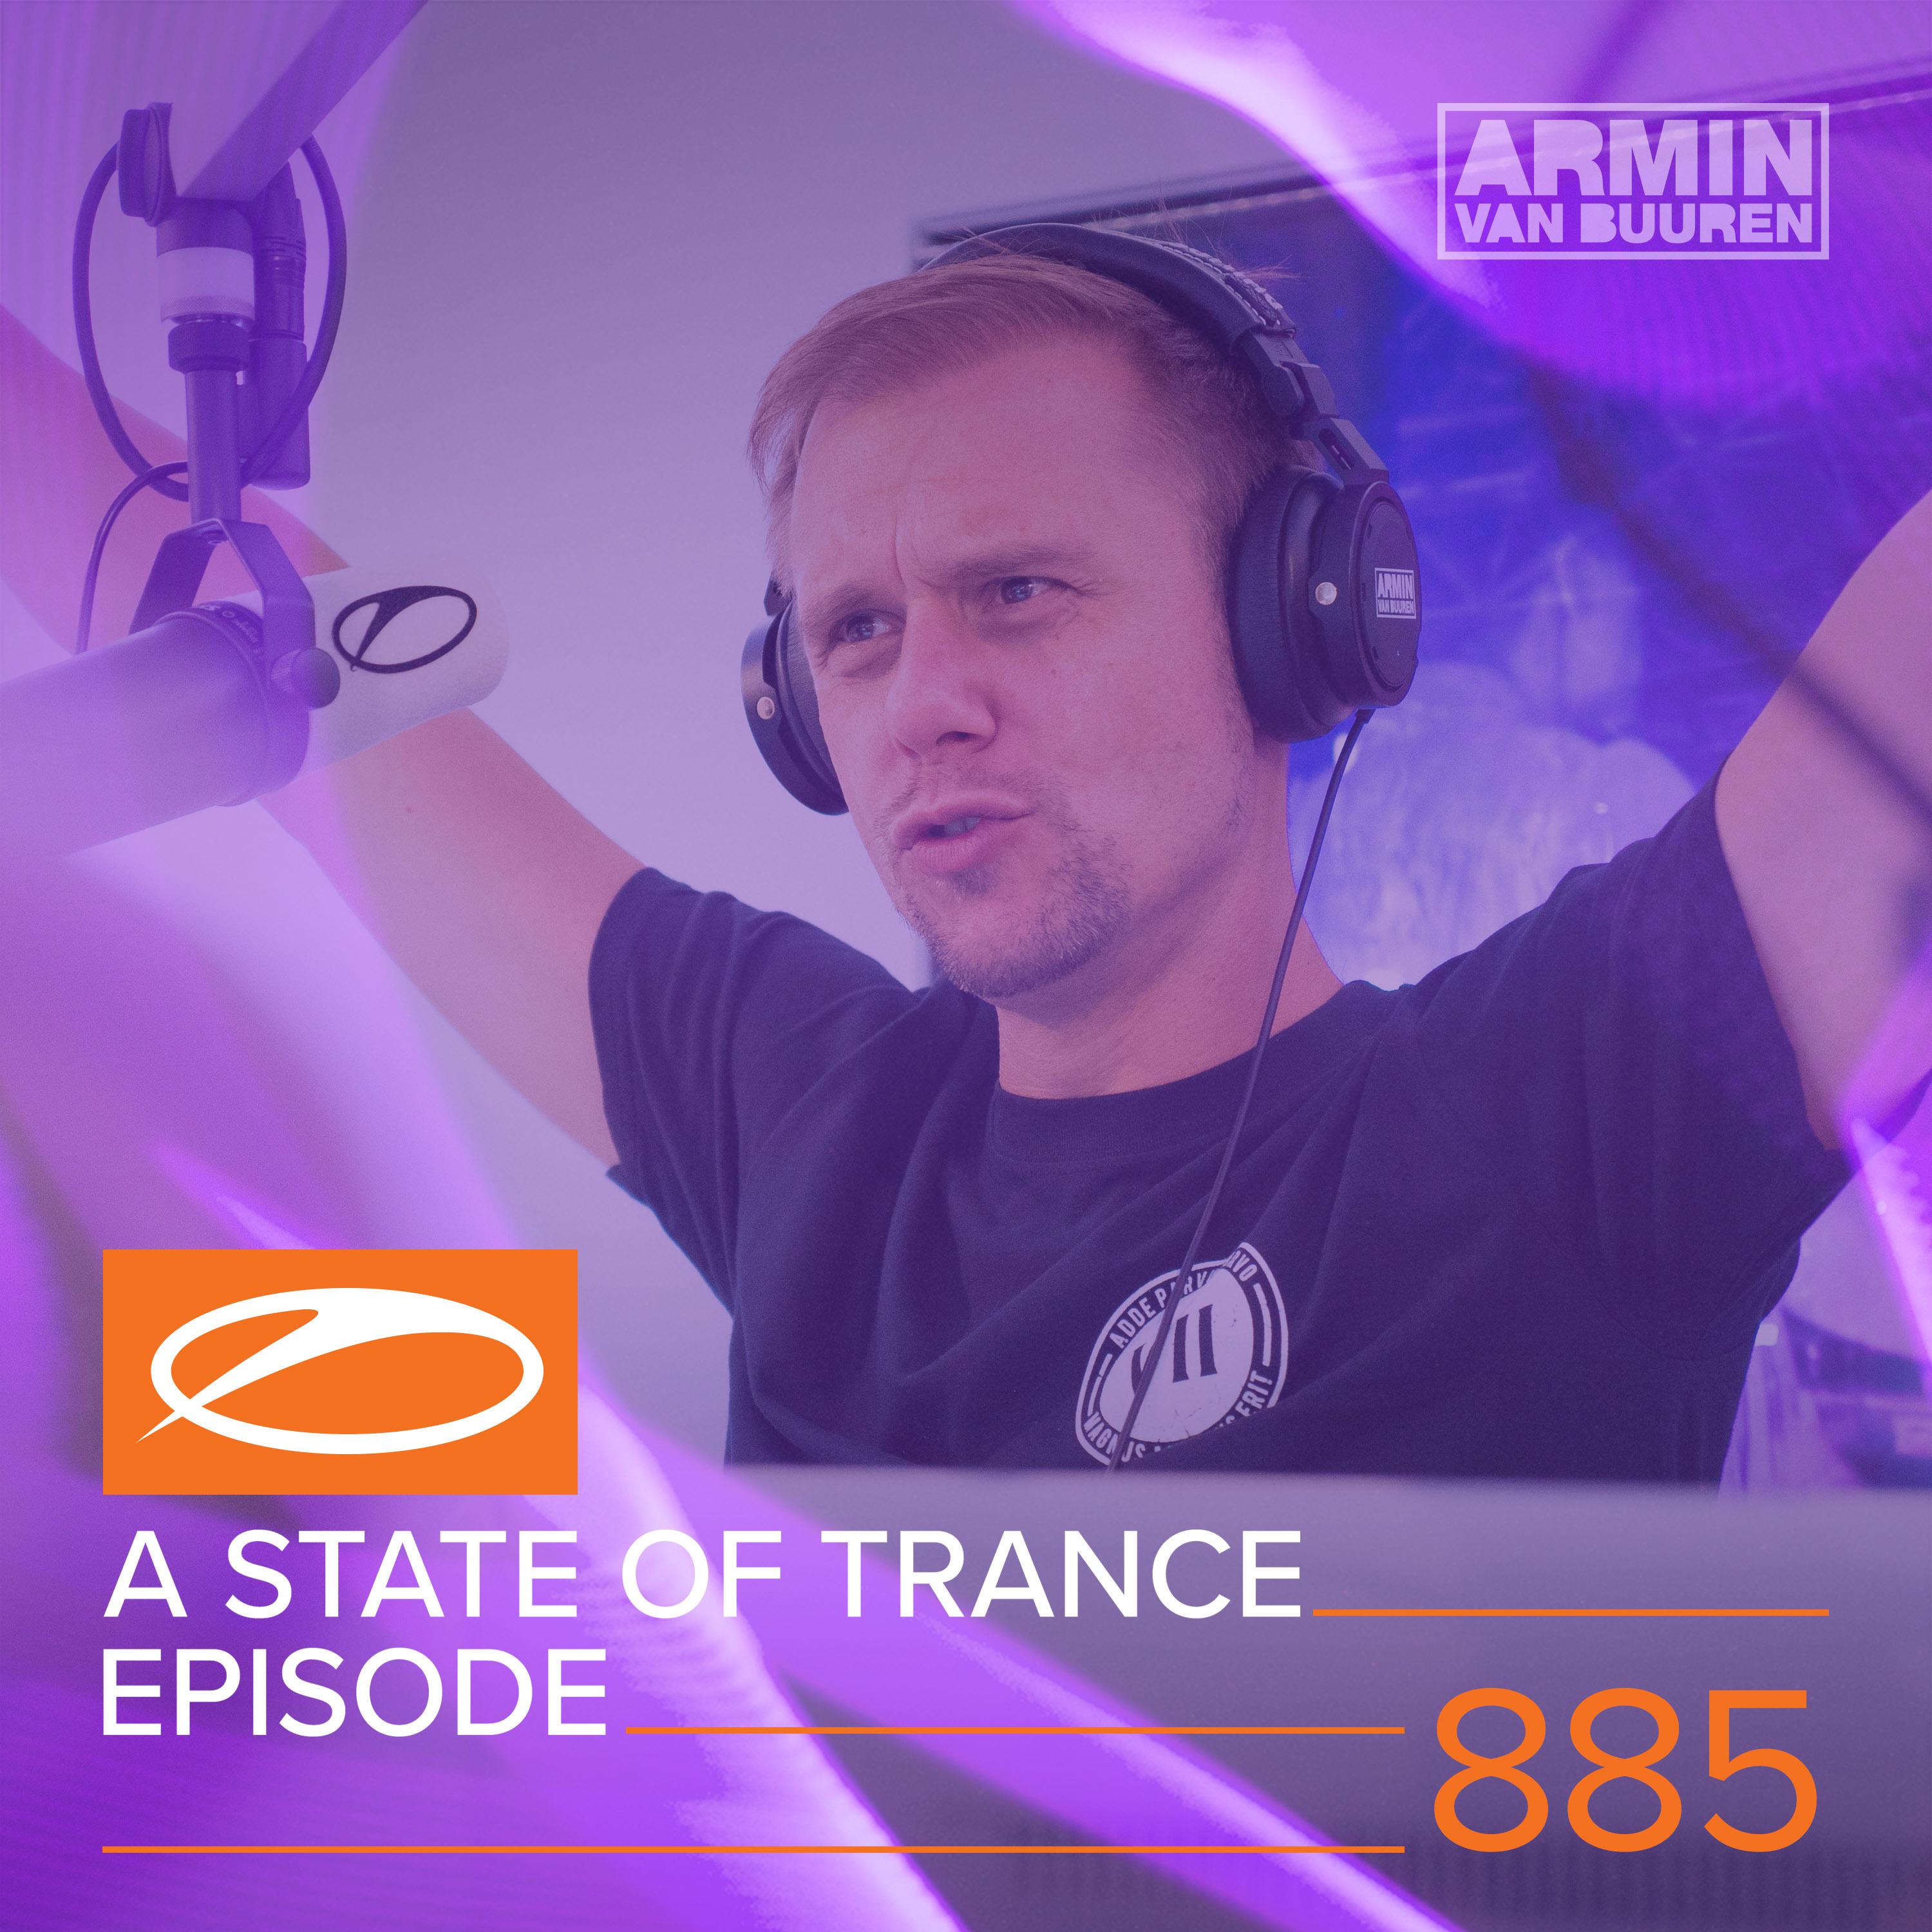 A State Of Trance (ASOT 885) (This Week's Service For Dreamers, Pt. 1)